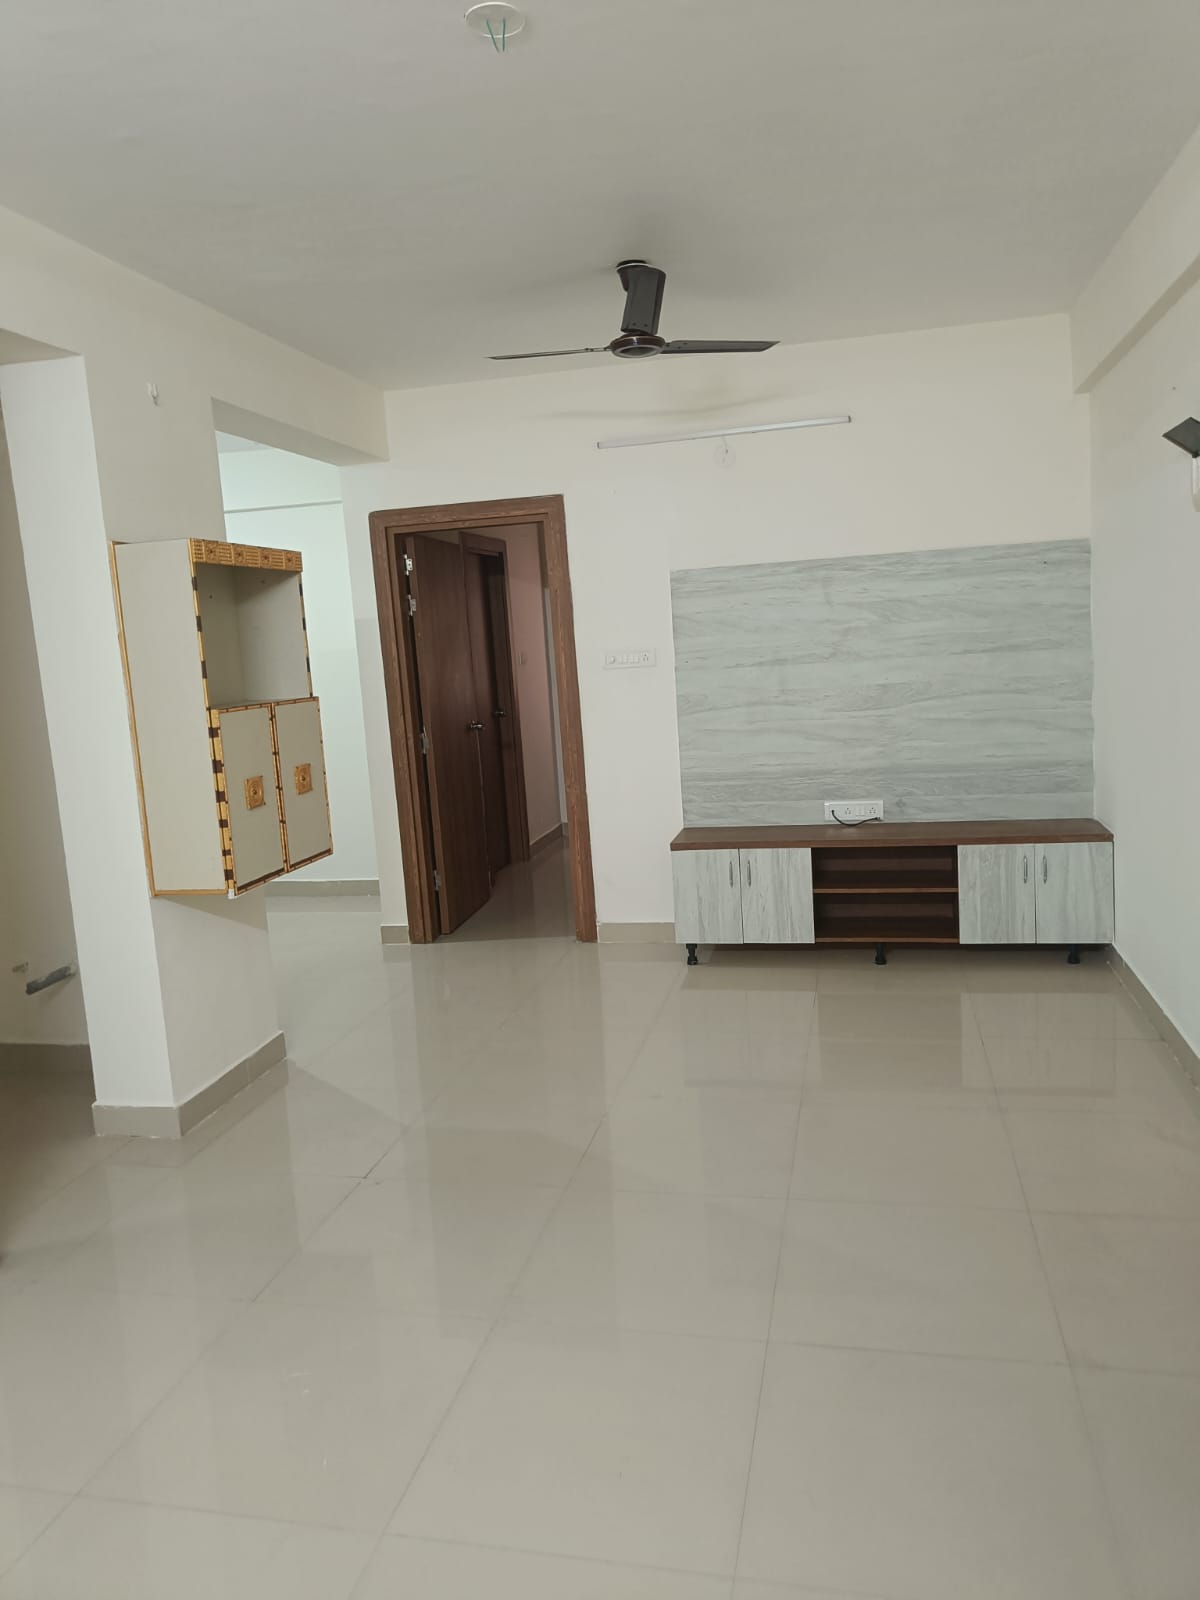 3 BHK Independent House for Lease Only at JAML2 - 5064-28lakh in Ramesh Nagar